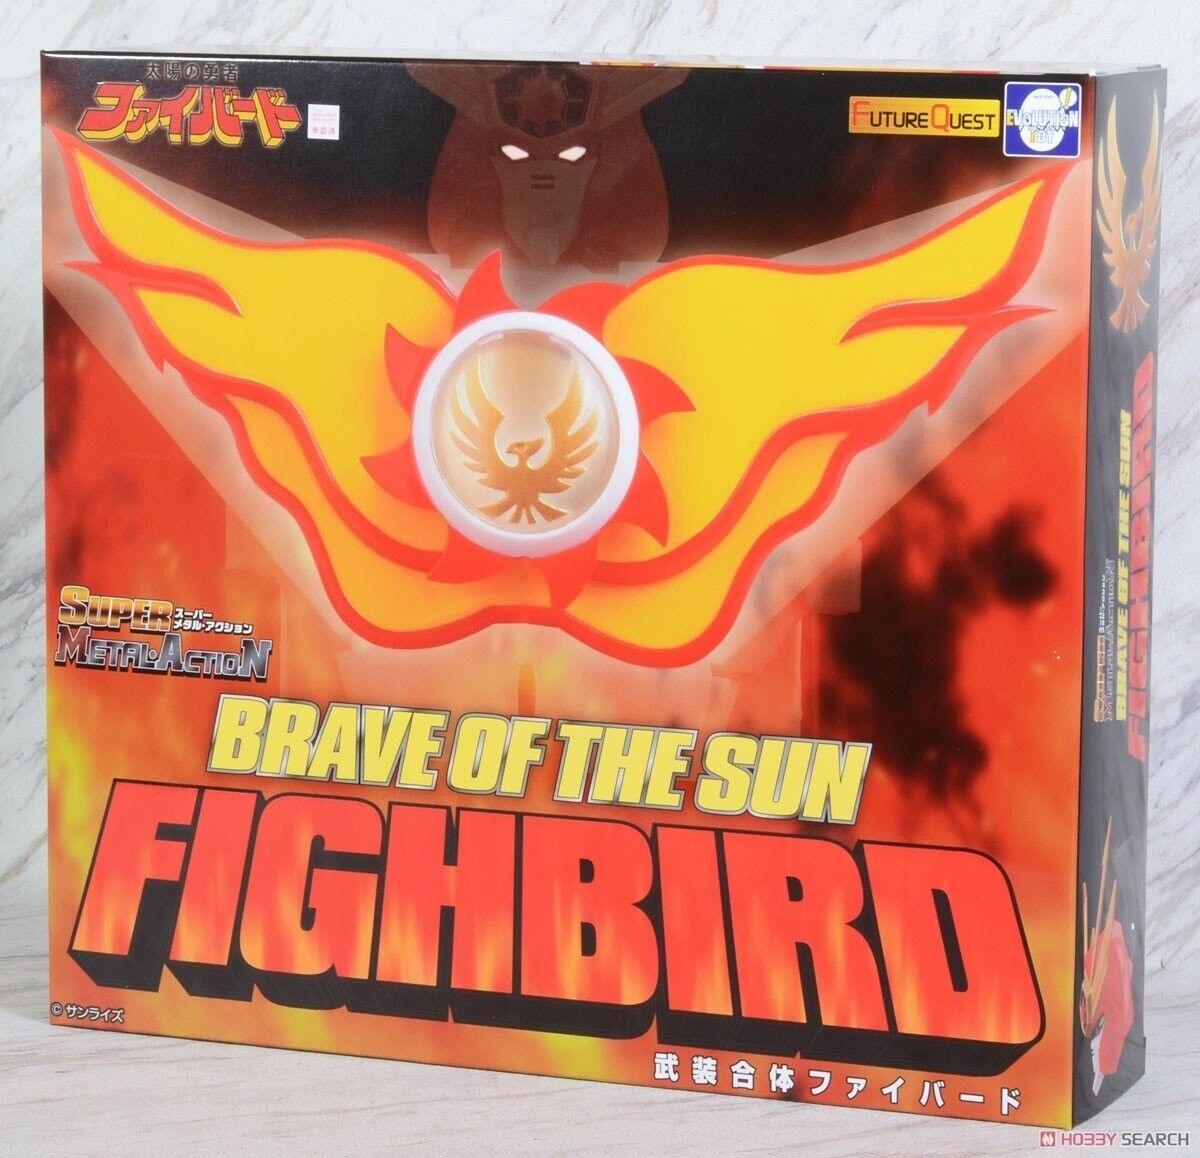 Evolution Toy Super Metal Action Brave of The Sun Fighbird ABS PVC Figure New